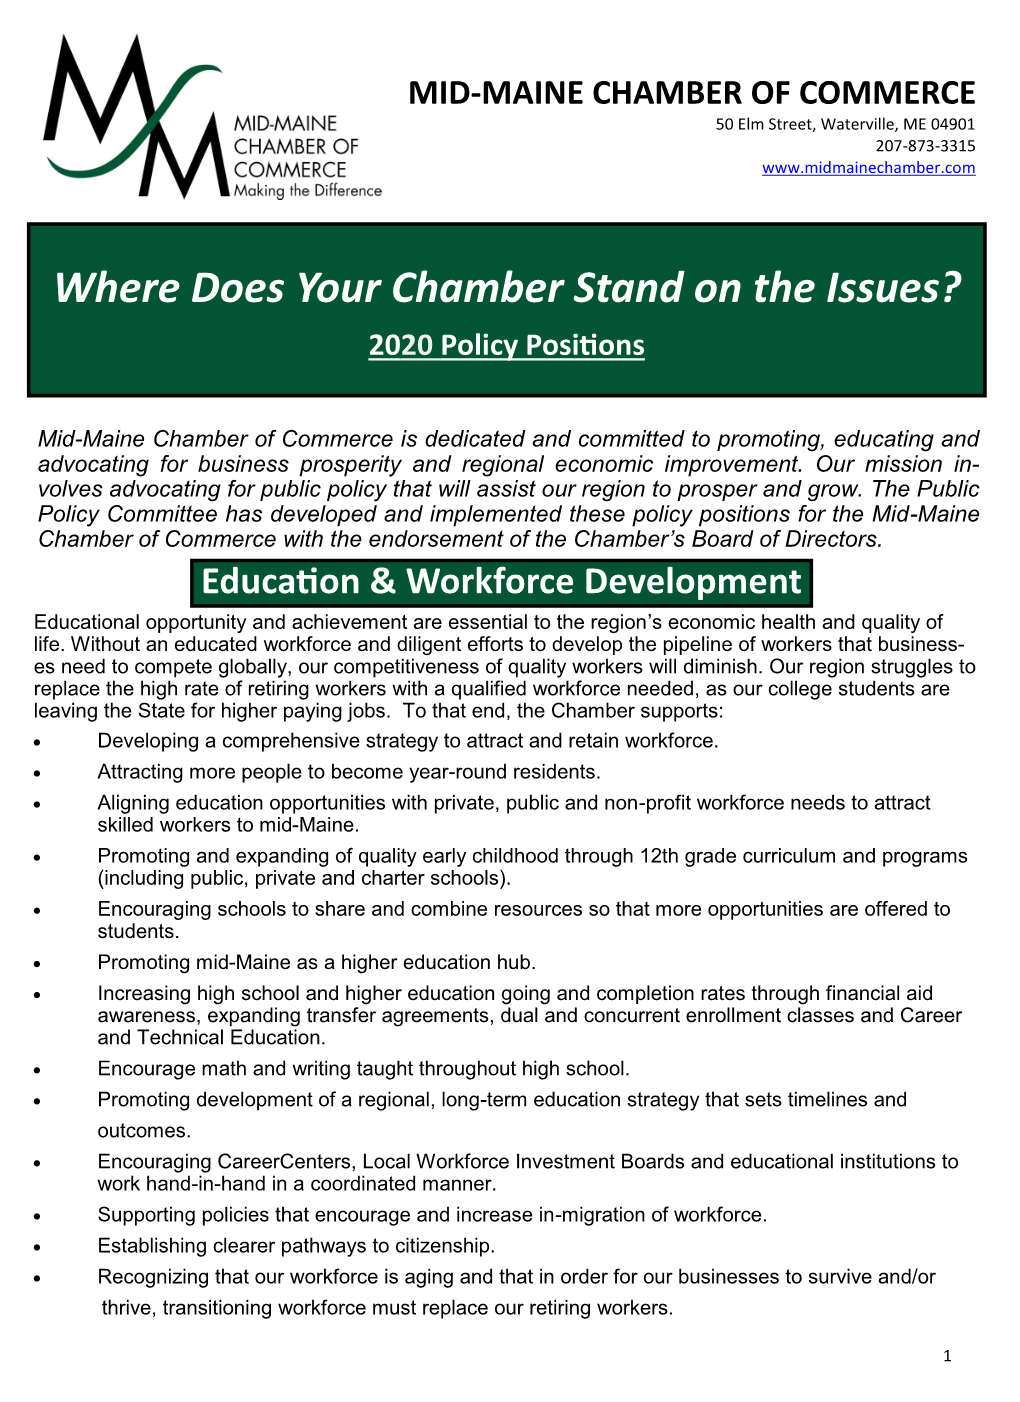 Where Does Your Chamber Stand on the Issues?